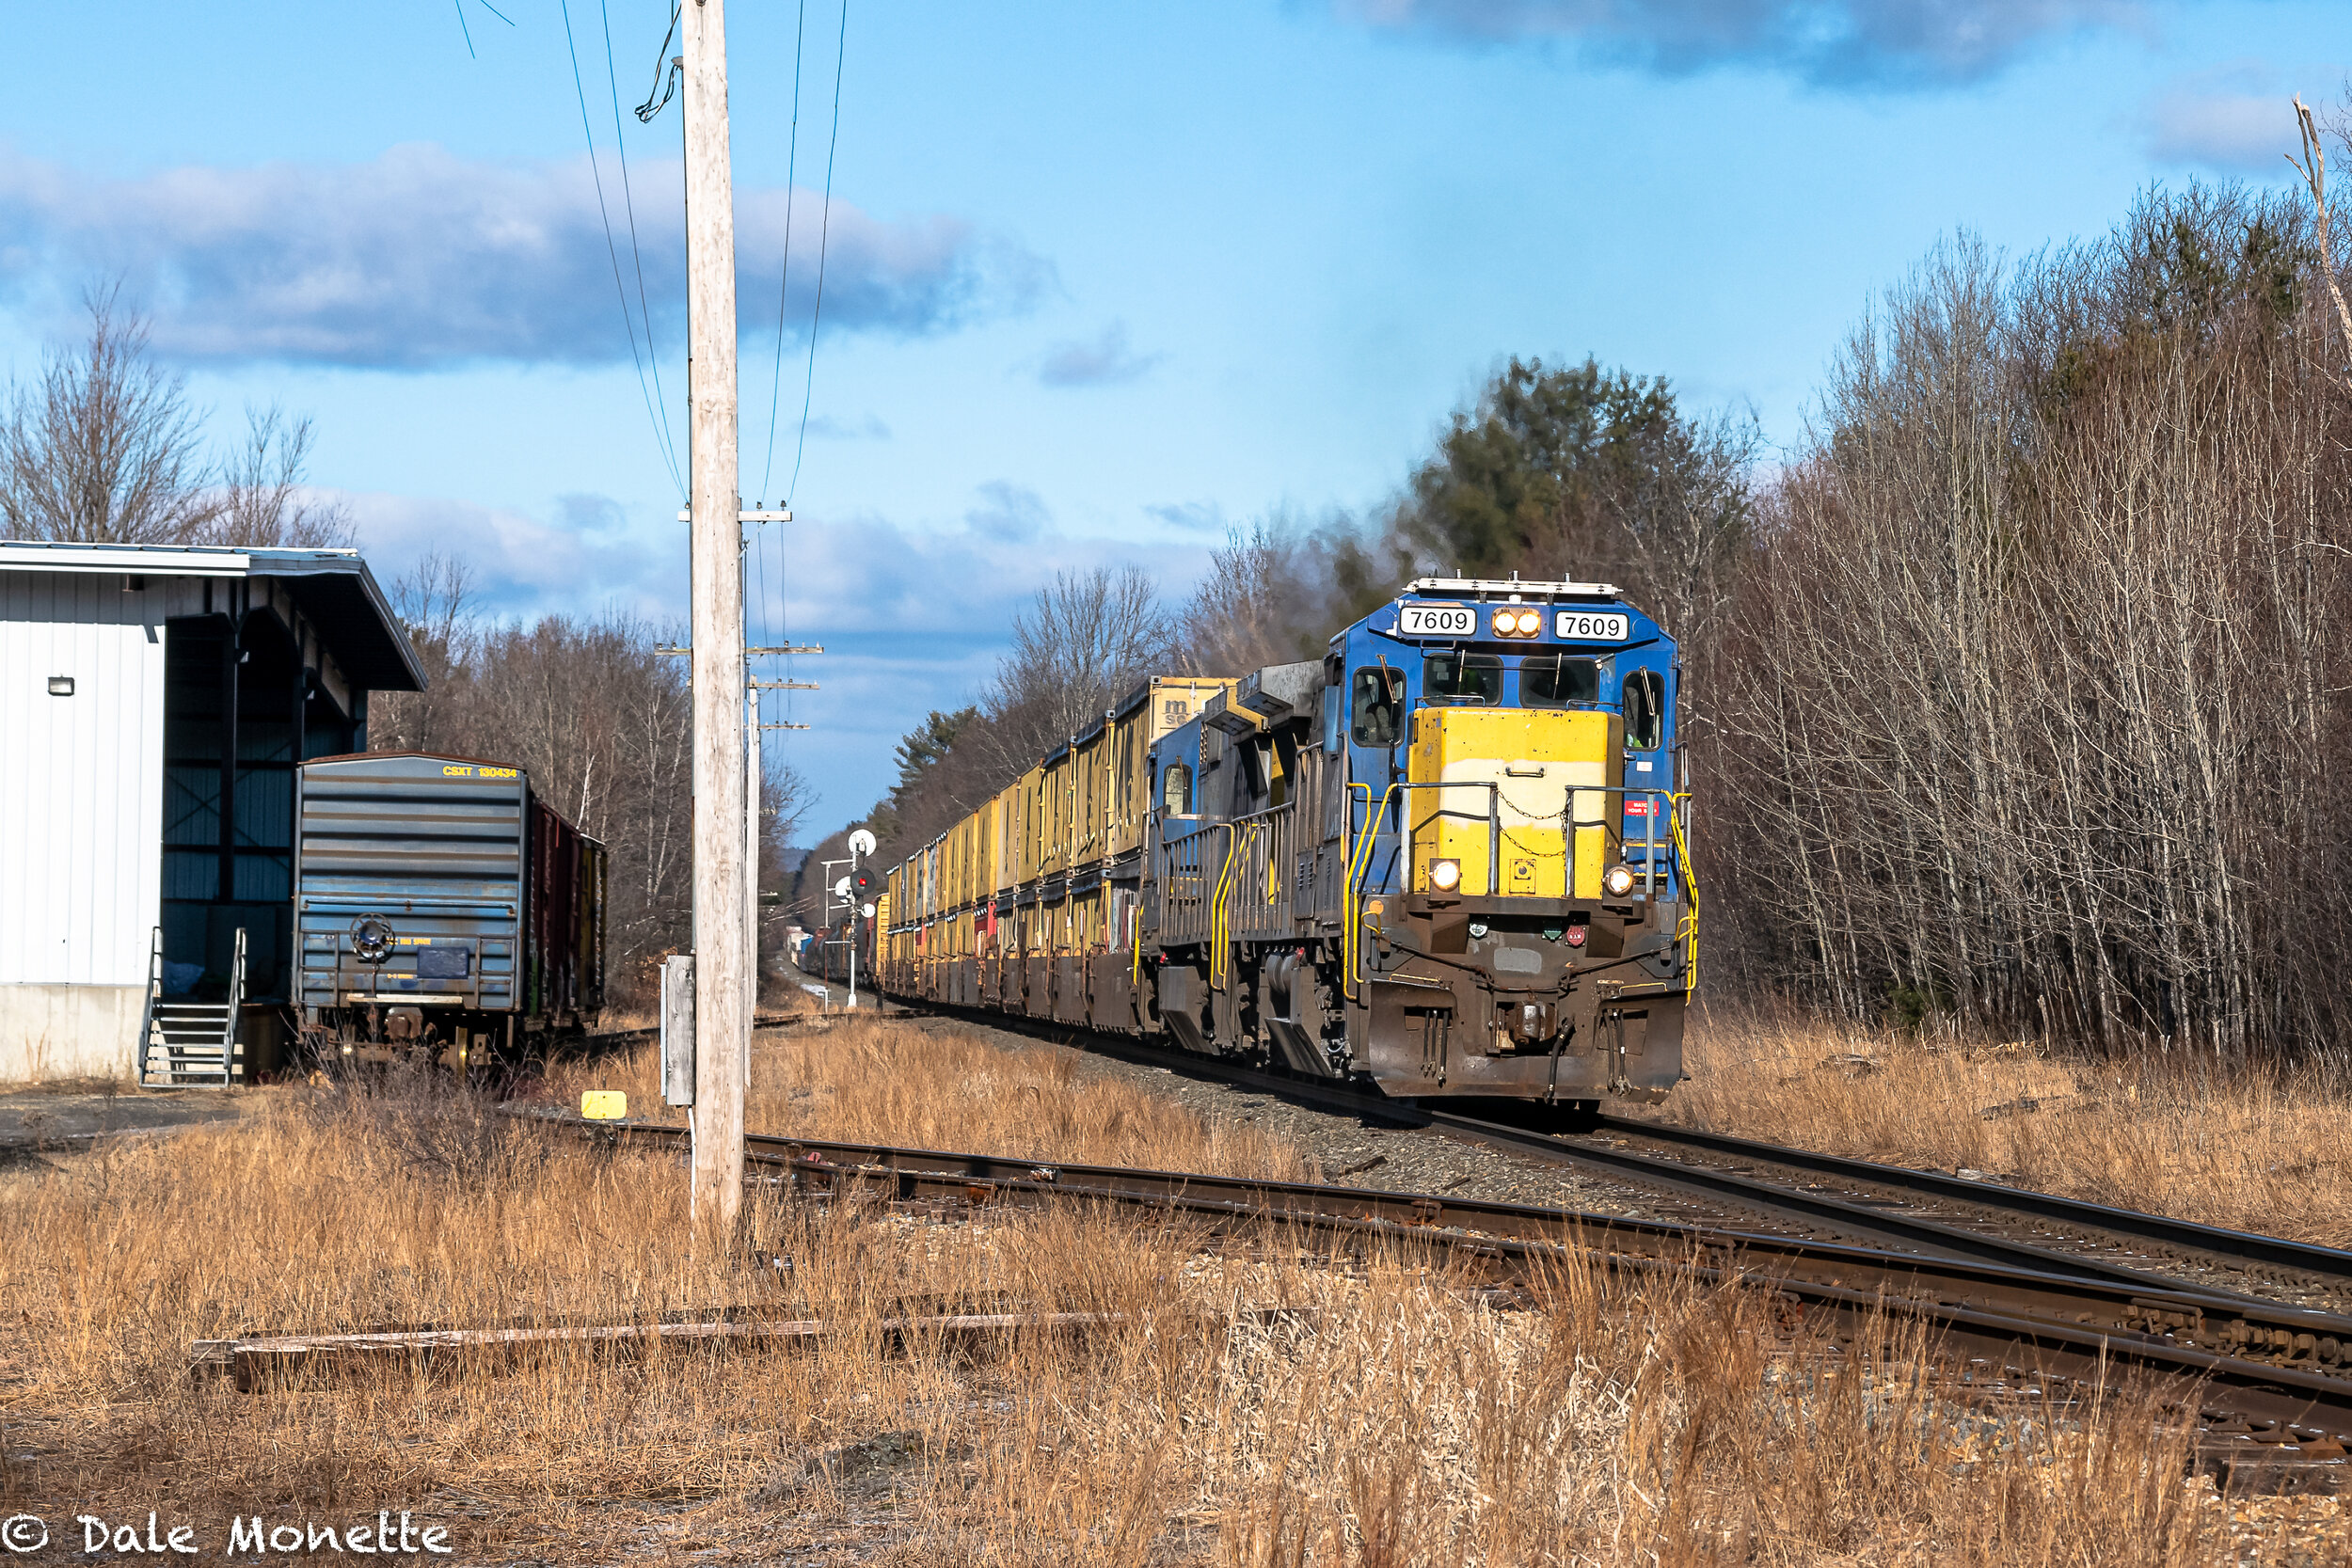   Every now and then I take some time away from wildlife and chase trains!   Here is a Pan Am Railways freight train over a mile long heading east up a long hill  through Otter River MA . More train images on this page at N Q Railroads on the menu ab